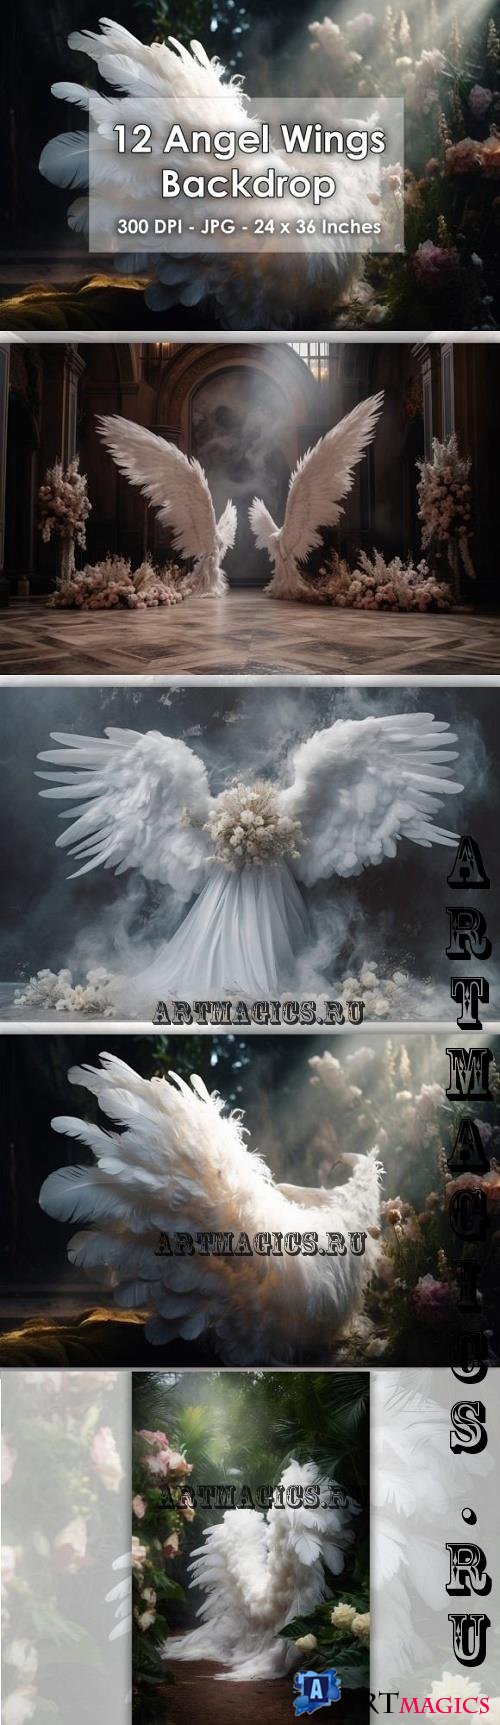 12 White Angel Wings Interior Backdrop